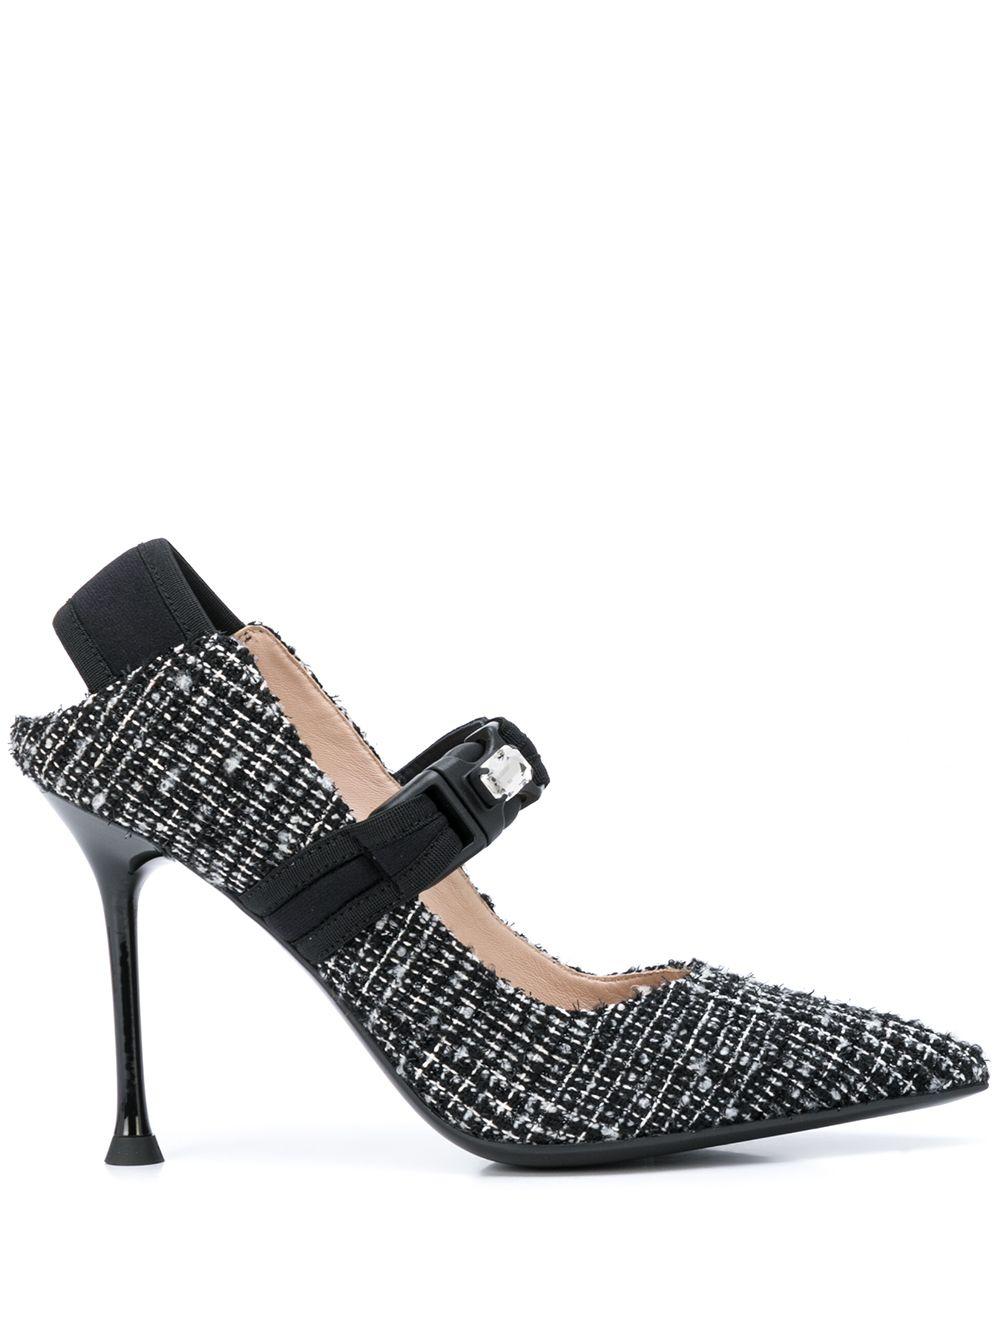 Alberto Gozzi Cotton Embellished Mary Jane Pumps in Black - Lyst